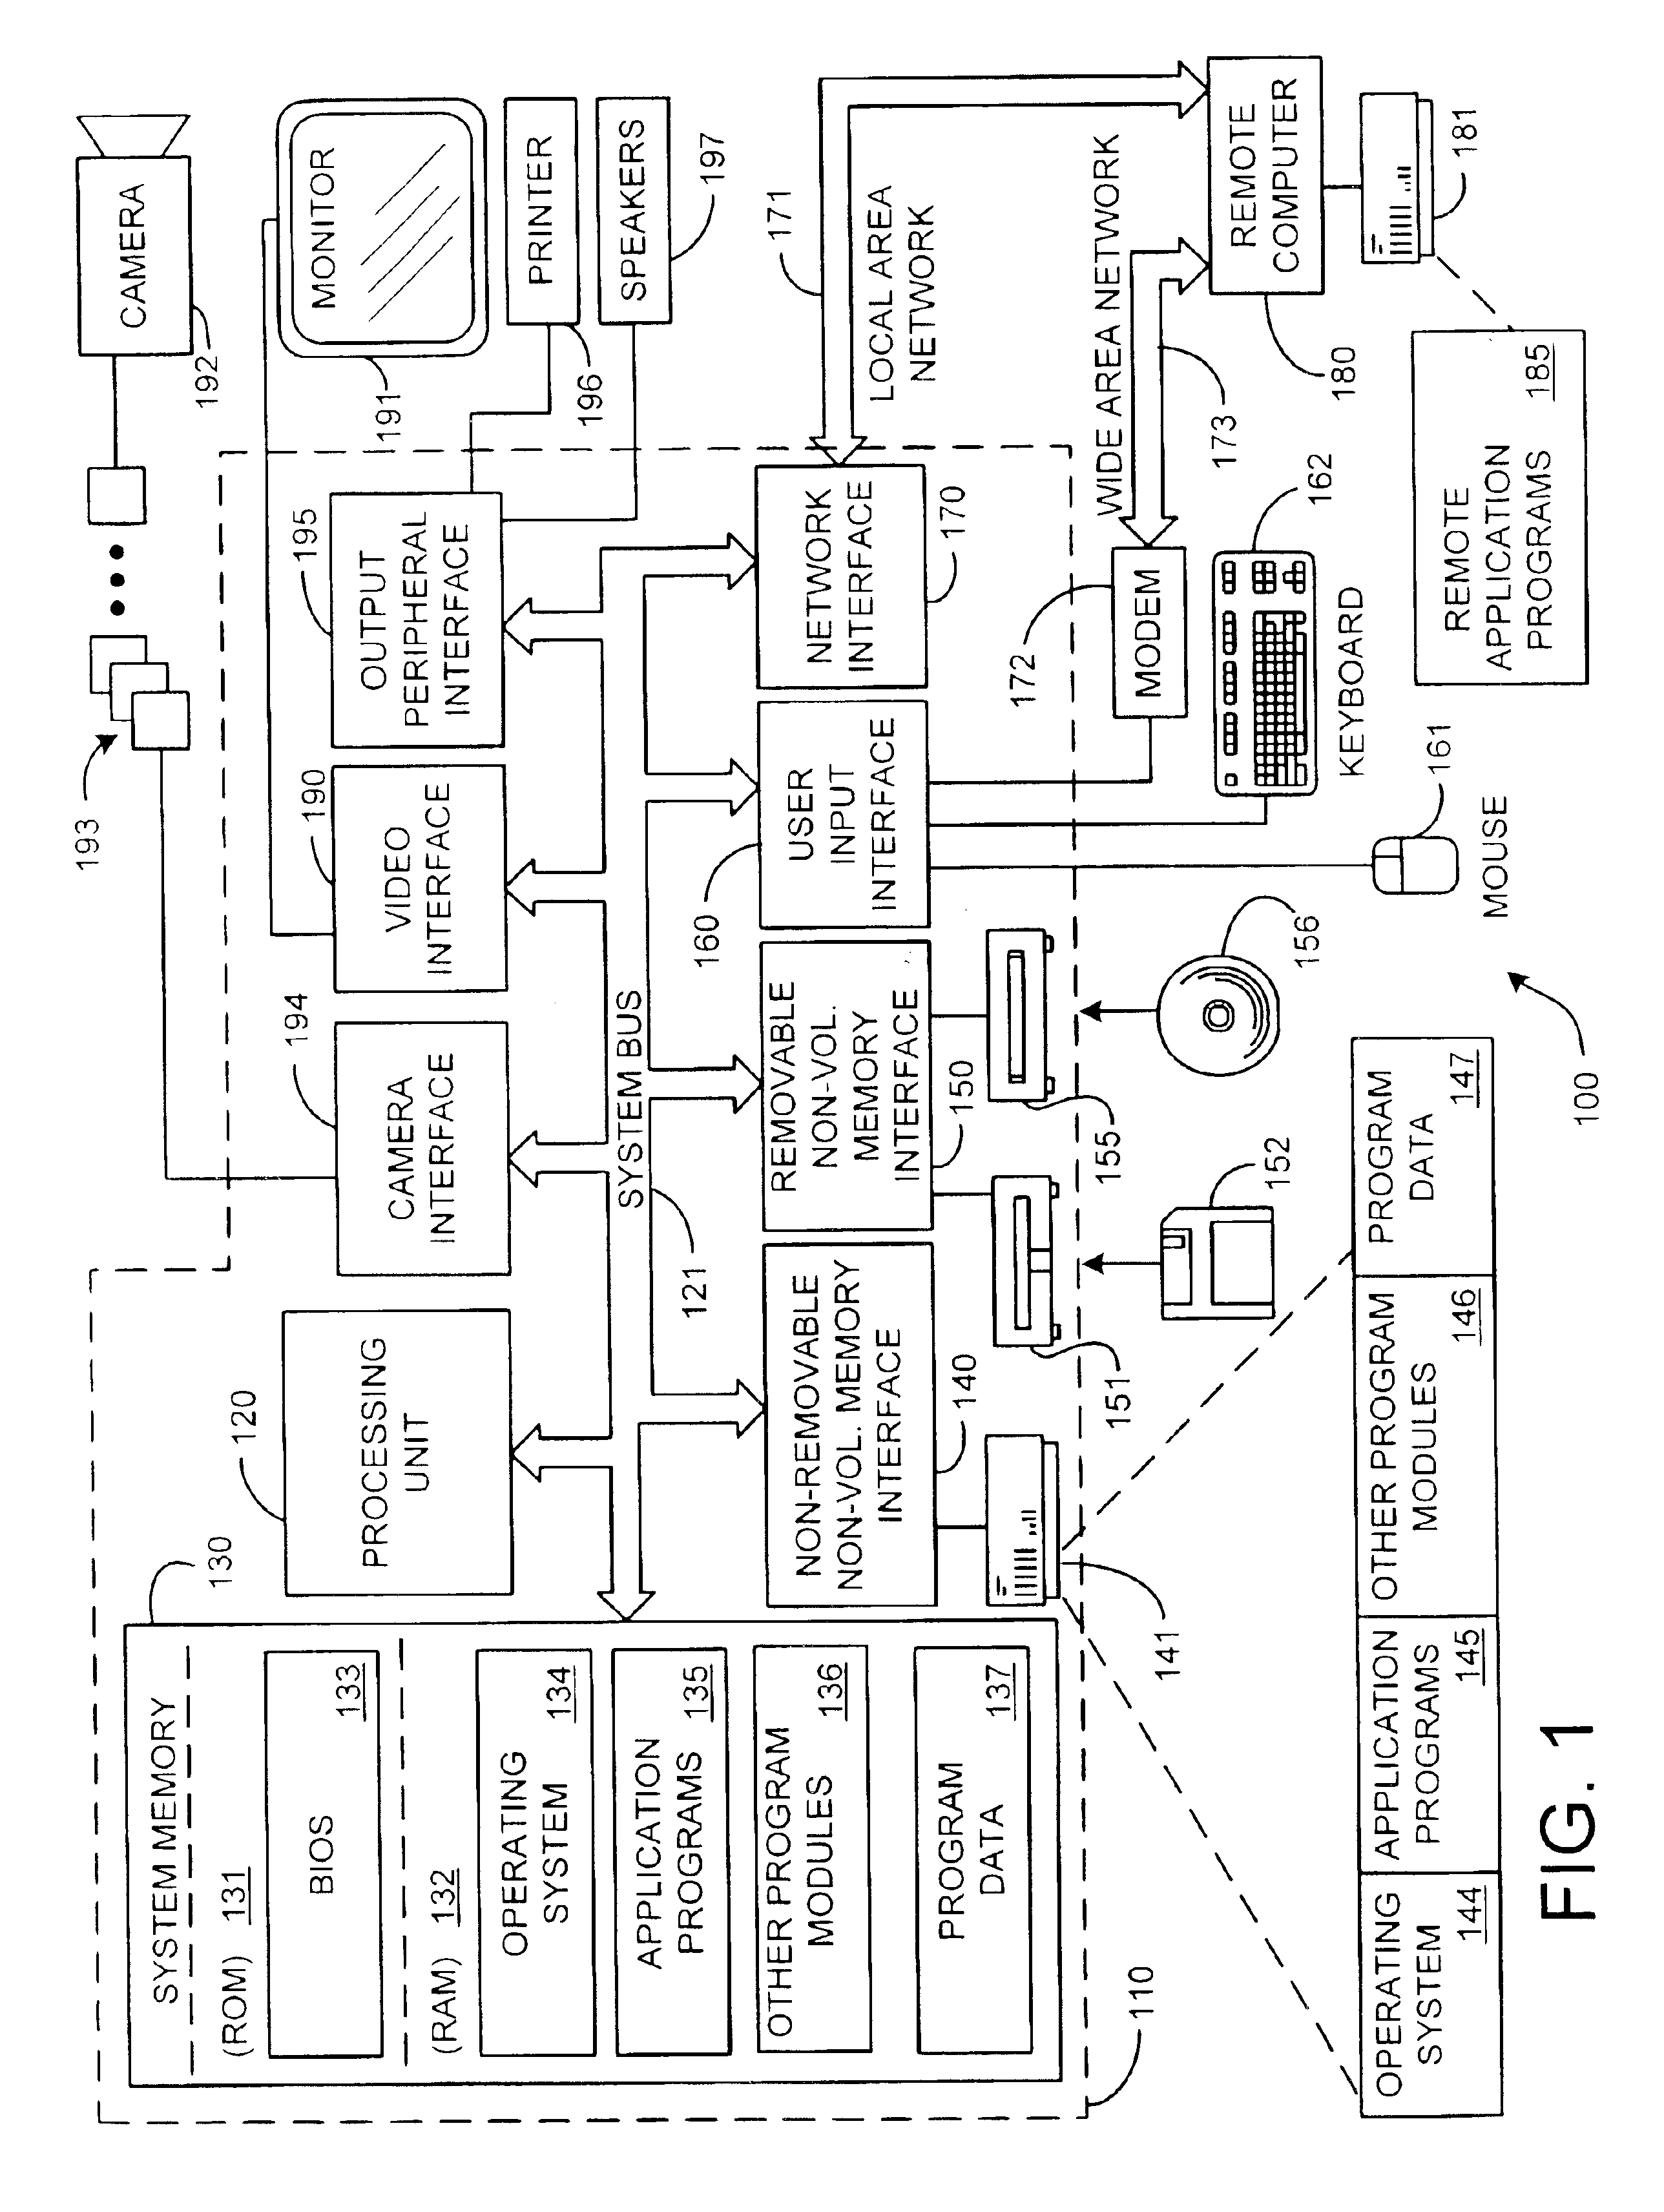 System and process for tracking an object state using a particle filter sensor fusion technique